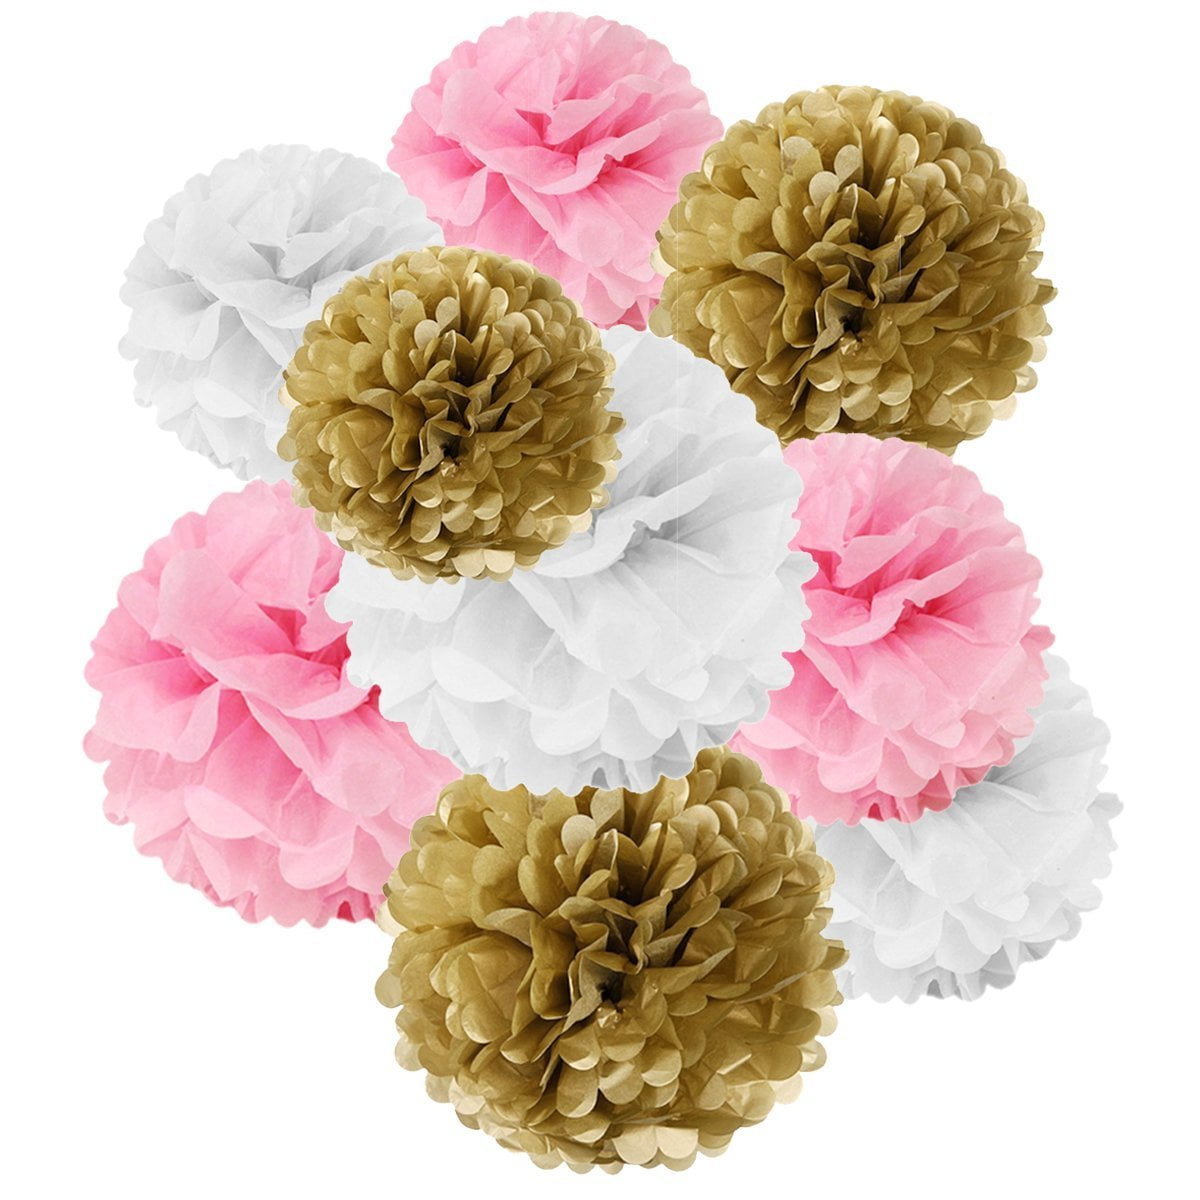 Time to Sparkle 15pcs Mixed Tissue Paper Pom Poms Decorations Handmade Hanging Flower Paper Pompoms Balls for Wedding Birthday Party Baby Shower 